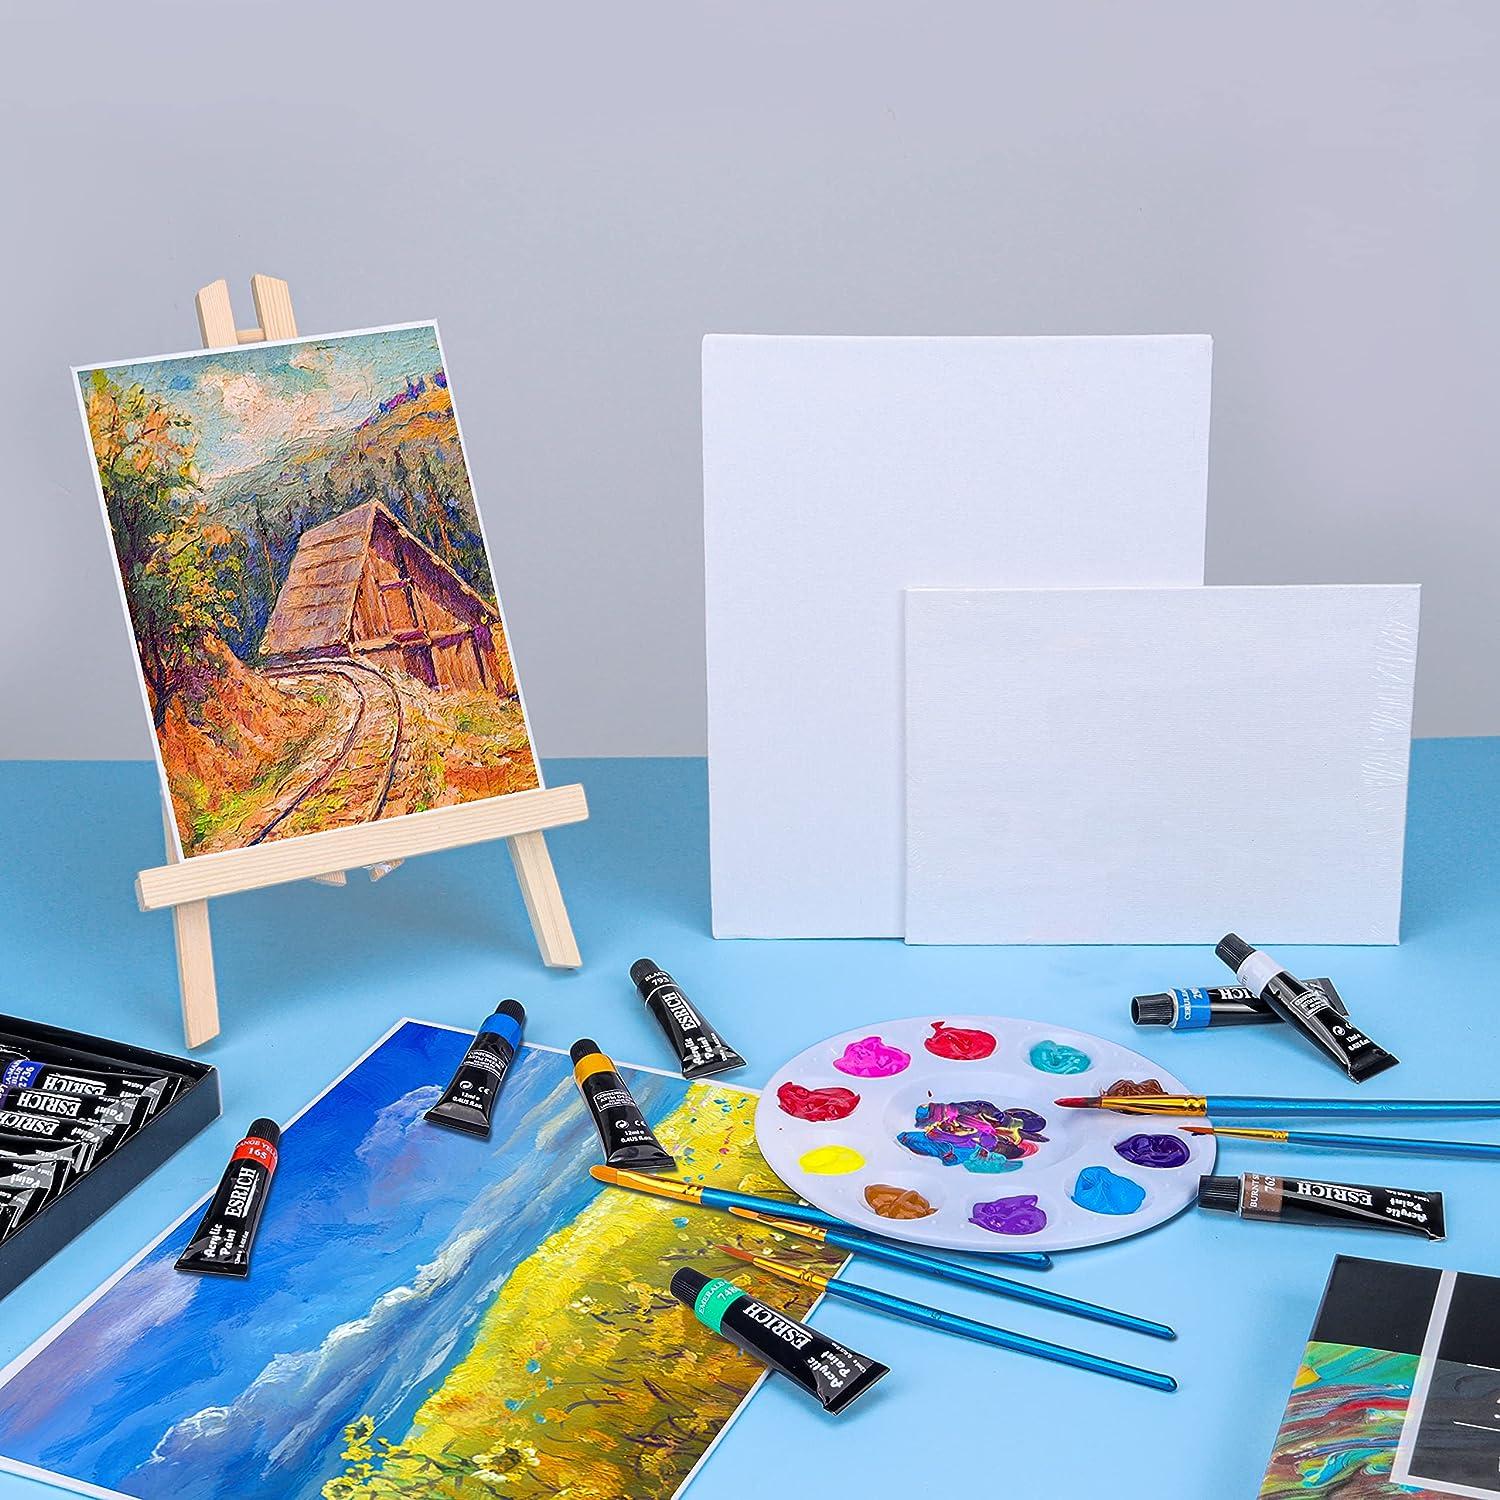 27 Pc Kids Art Set: Non-toxic Paints, Canvases, Brushes, Easel